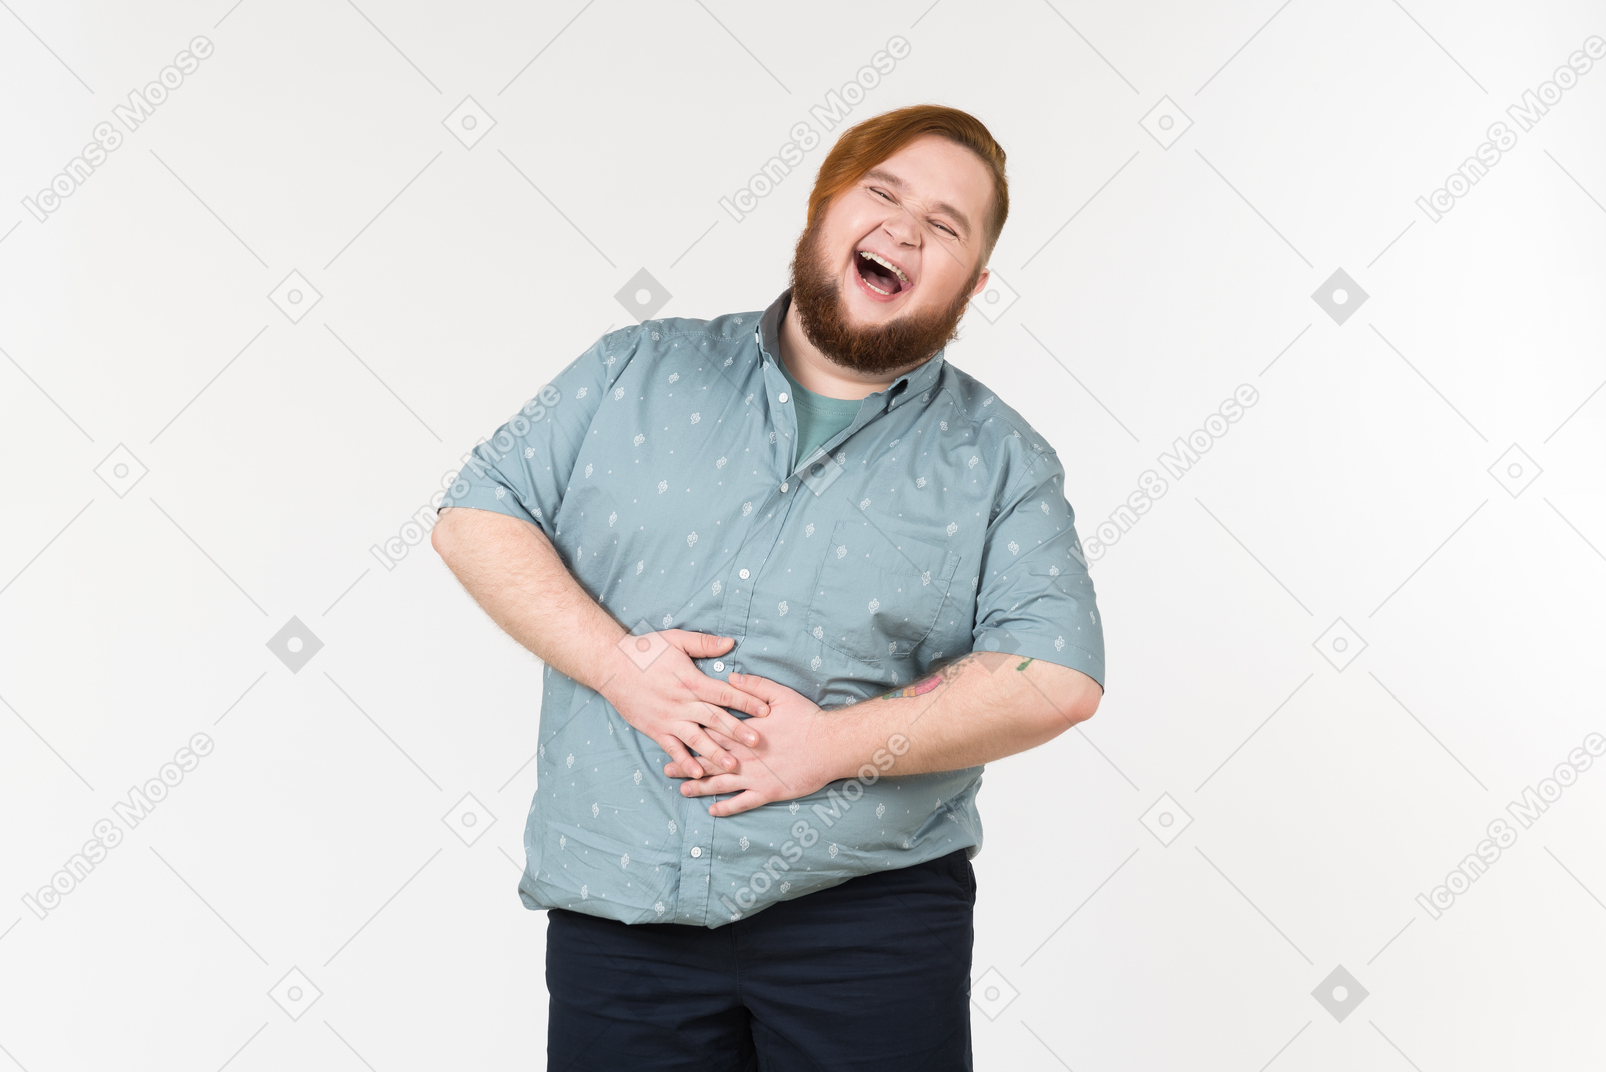 A fat man laughing loudly